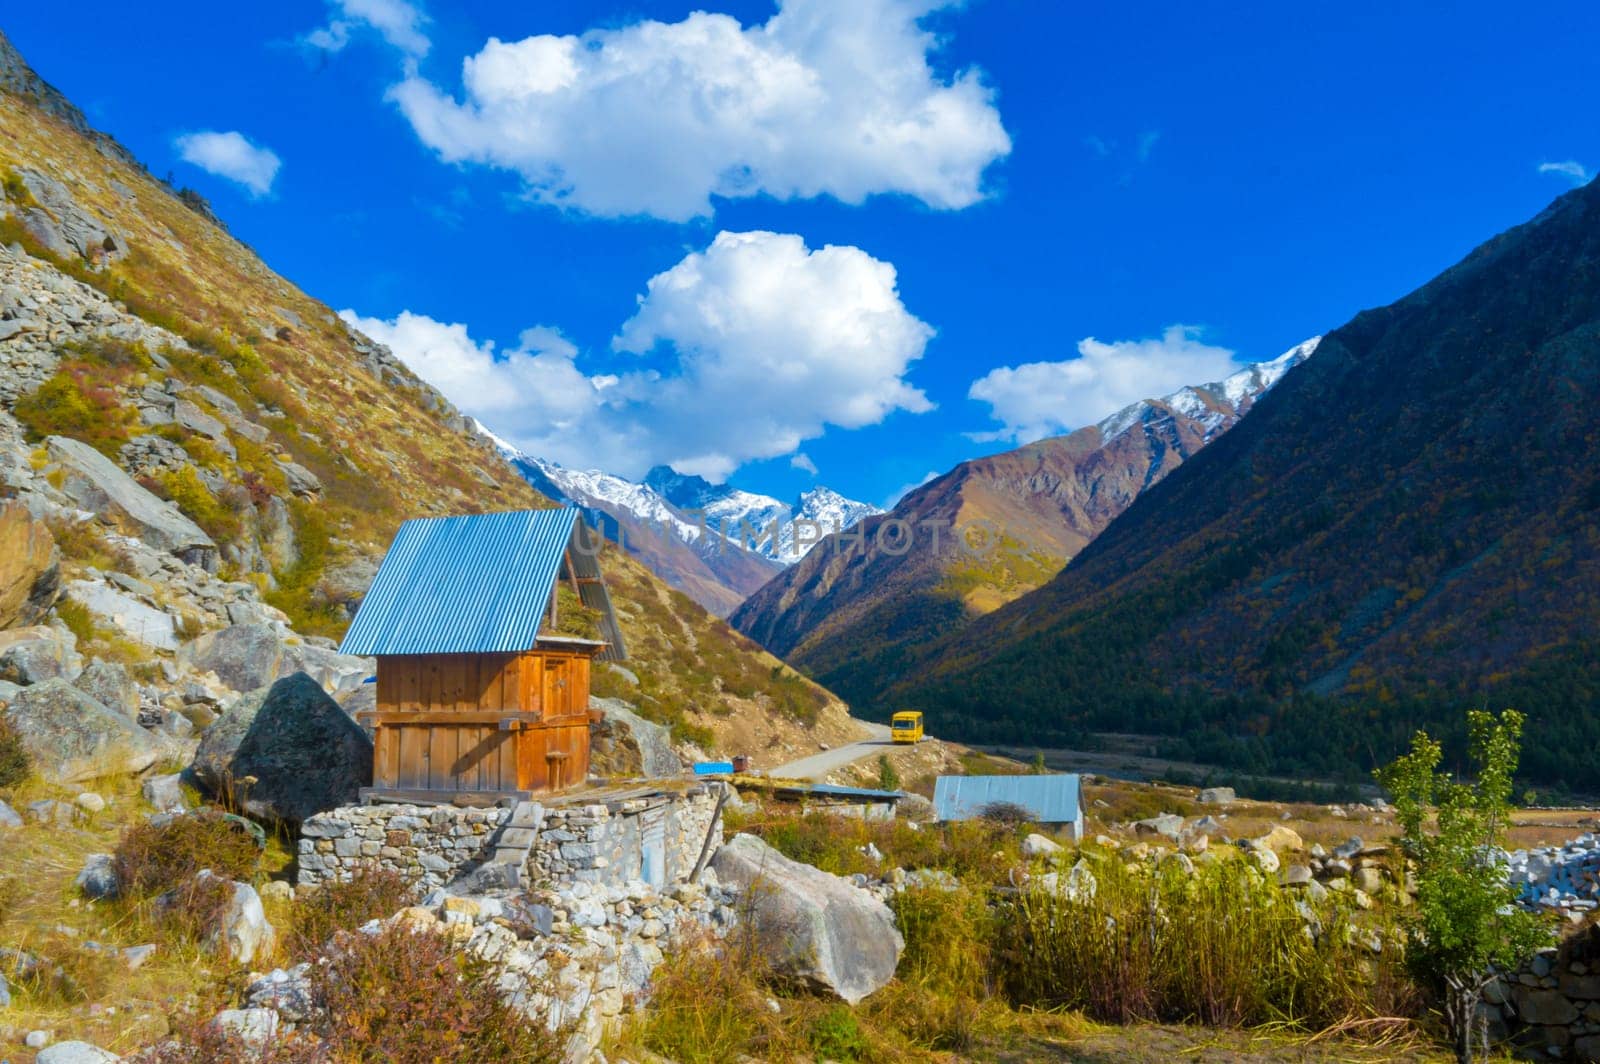 A small cabin room in a mountain valley against blue sky and flying clouds in the background. Chitkul Village Himachal Pradesh India South Asia Pacific by sudiptabhowmick